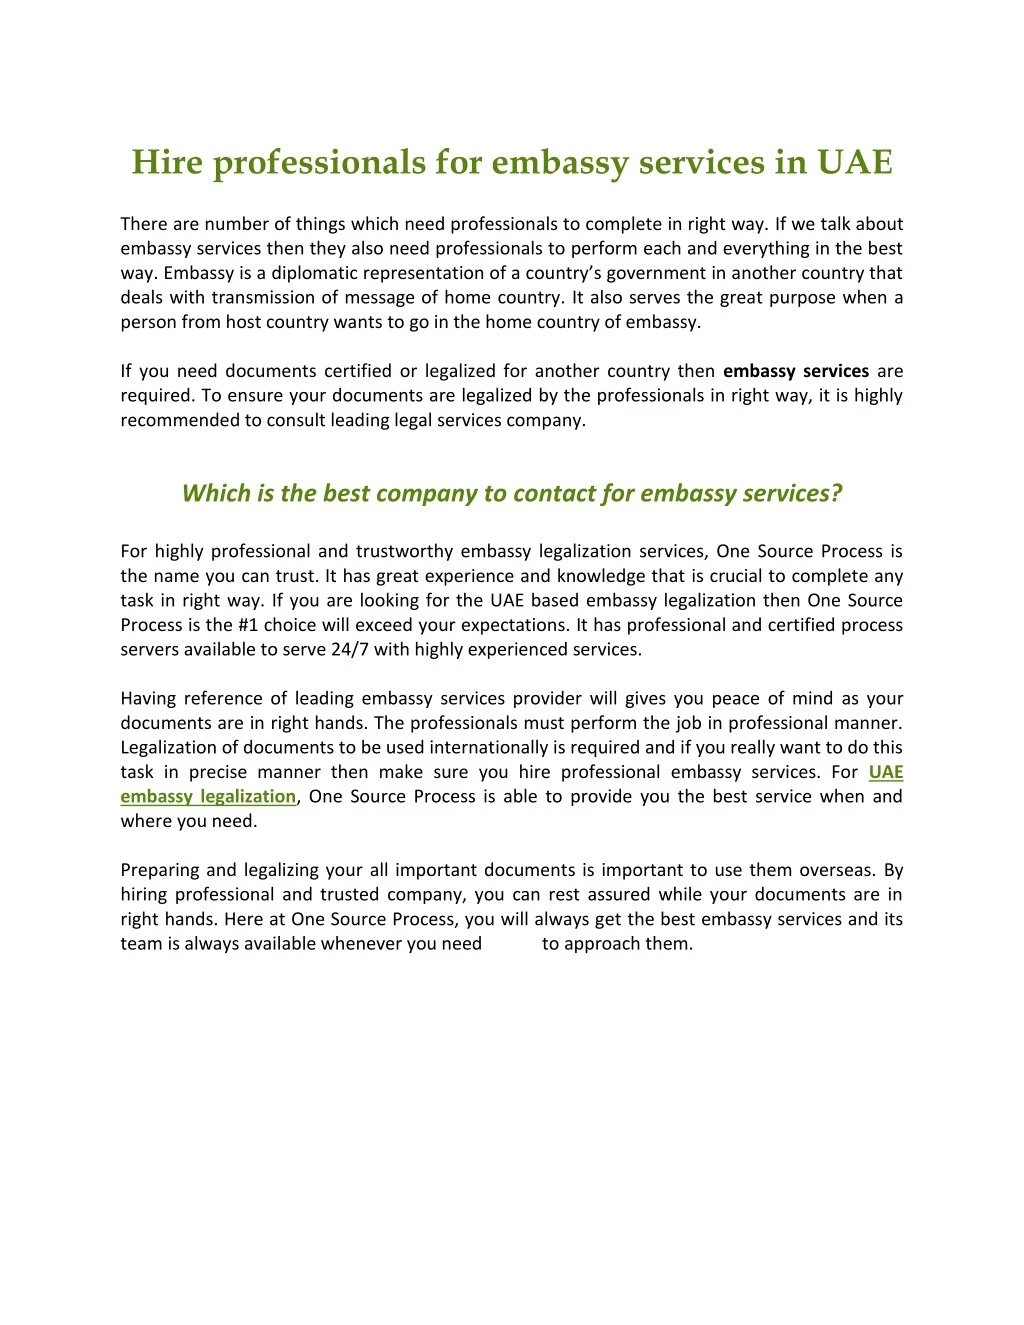 hire professionals for embassy services in uae